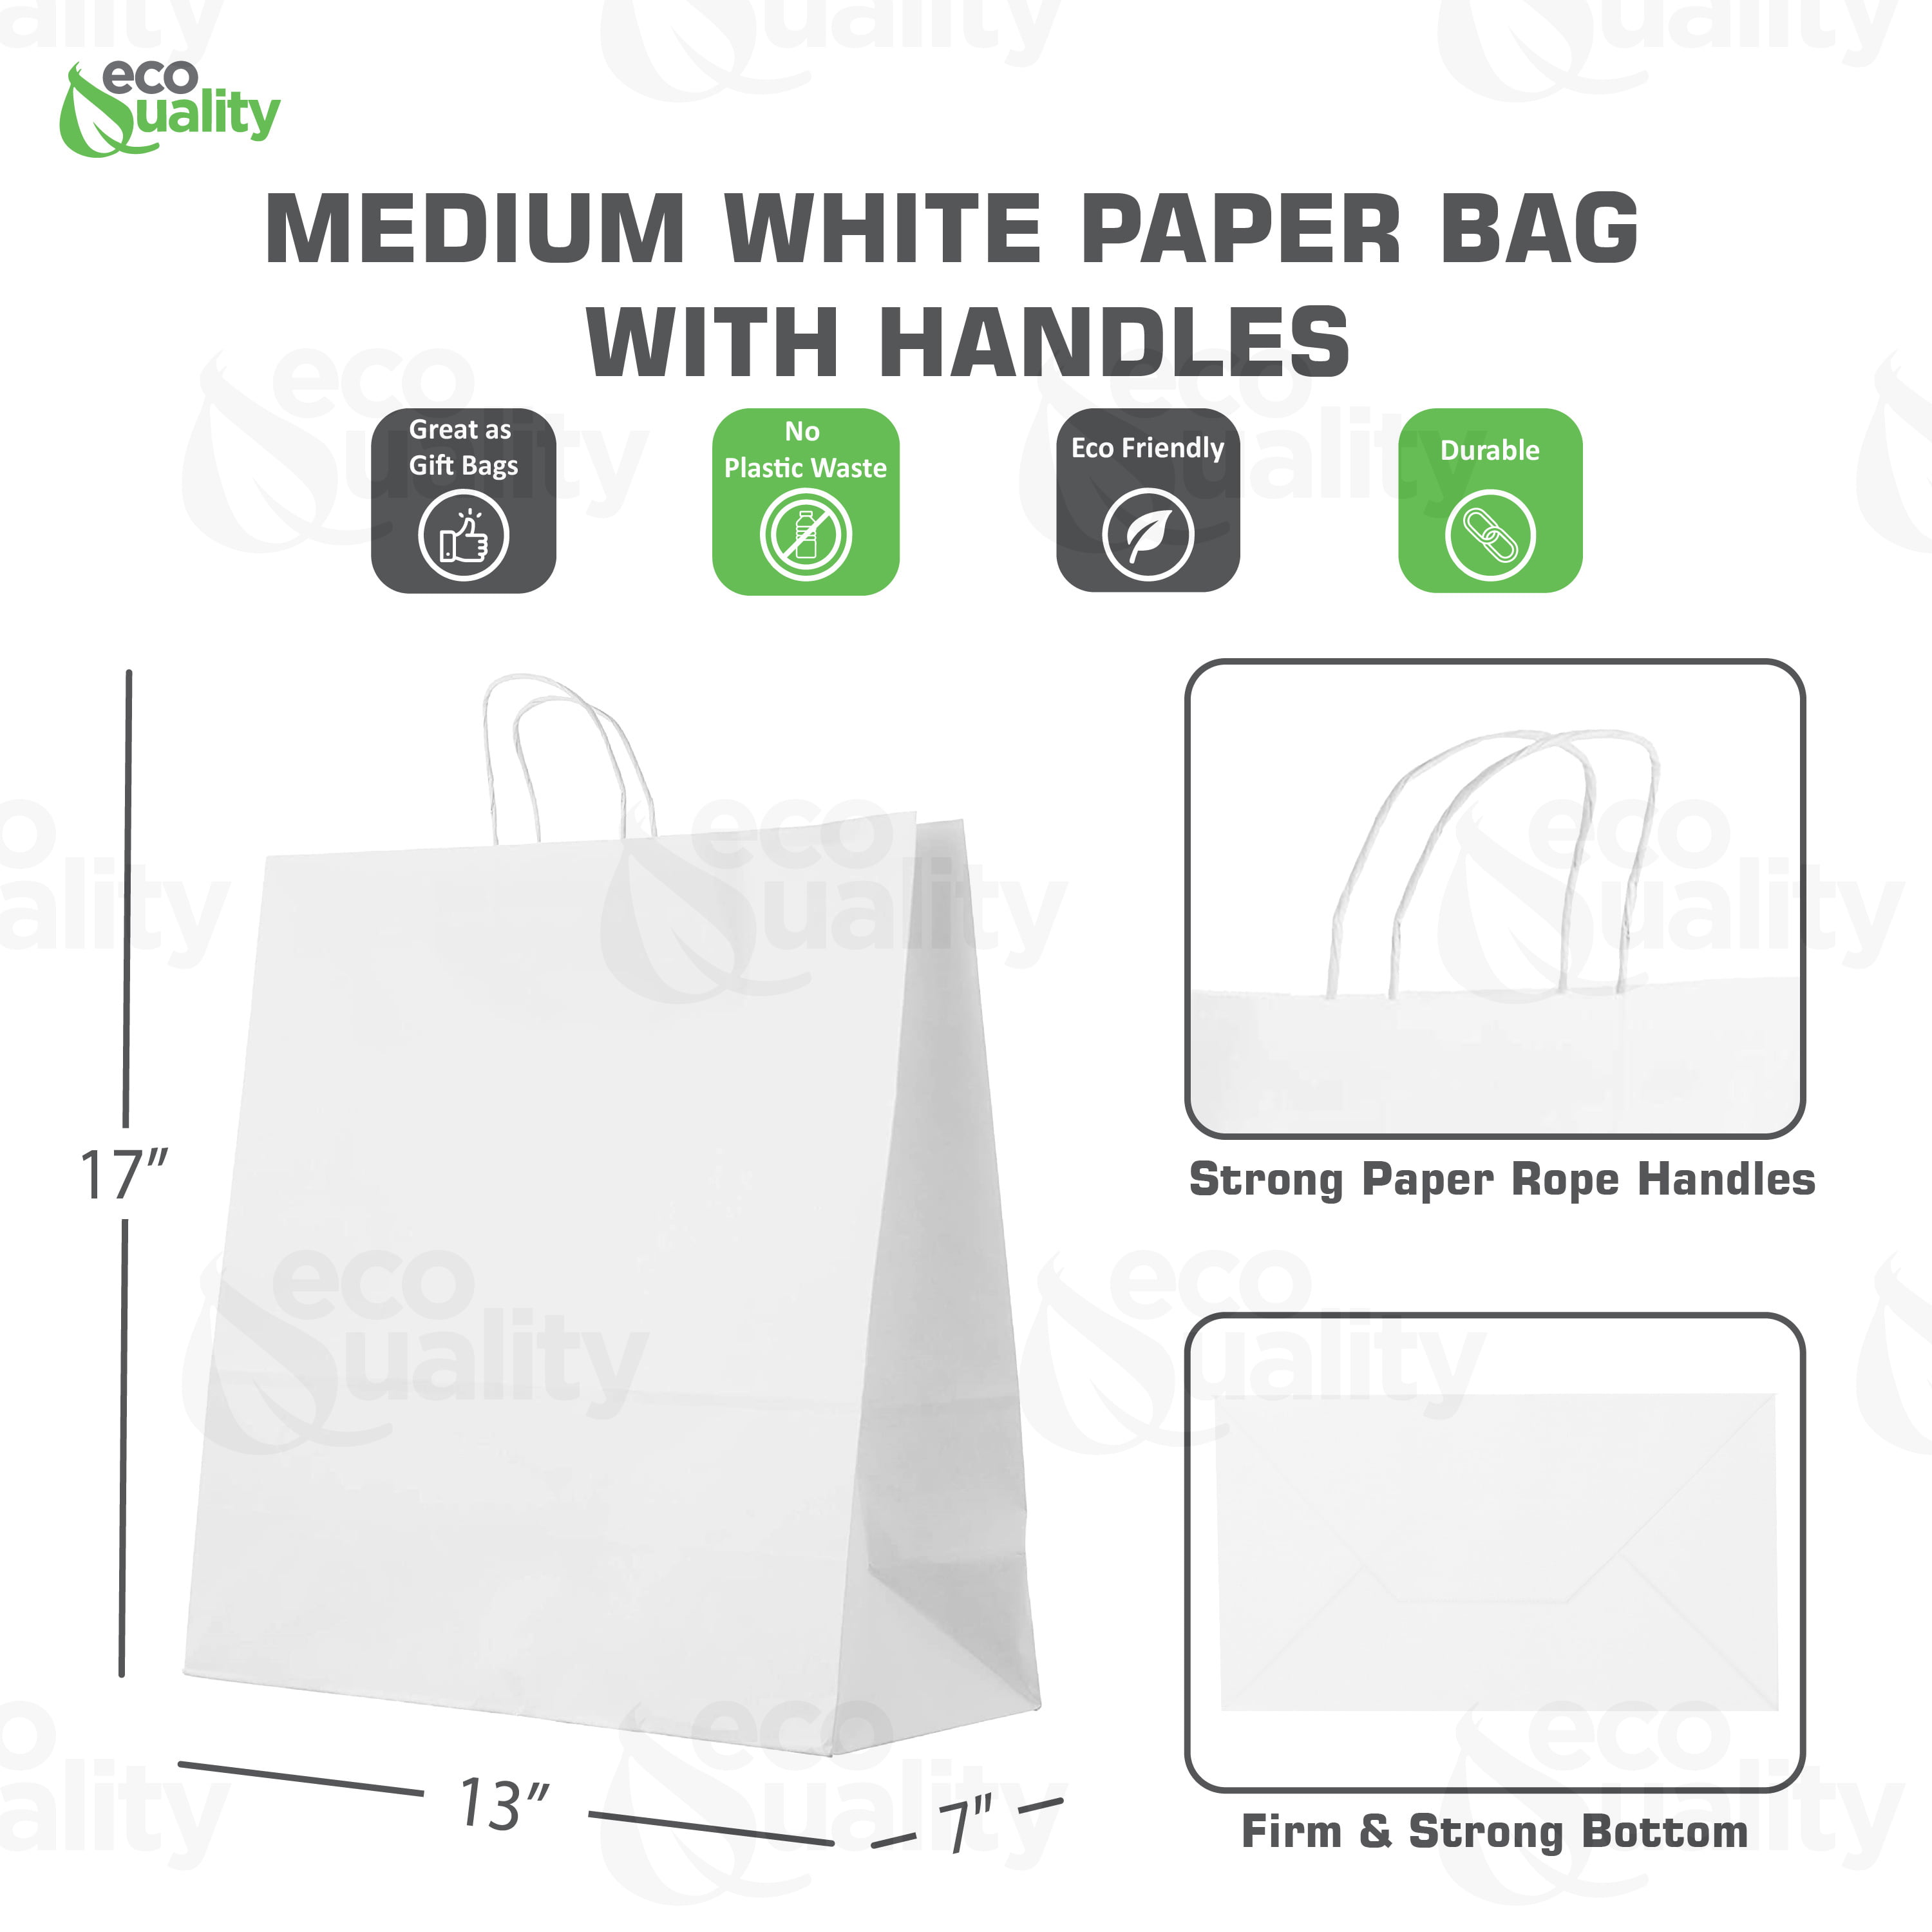 School Smart Paper Bag, Flat Bottom, 7 x 13 Inches, White, Pack of 50